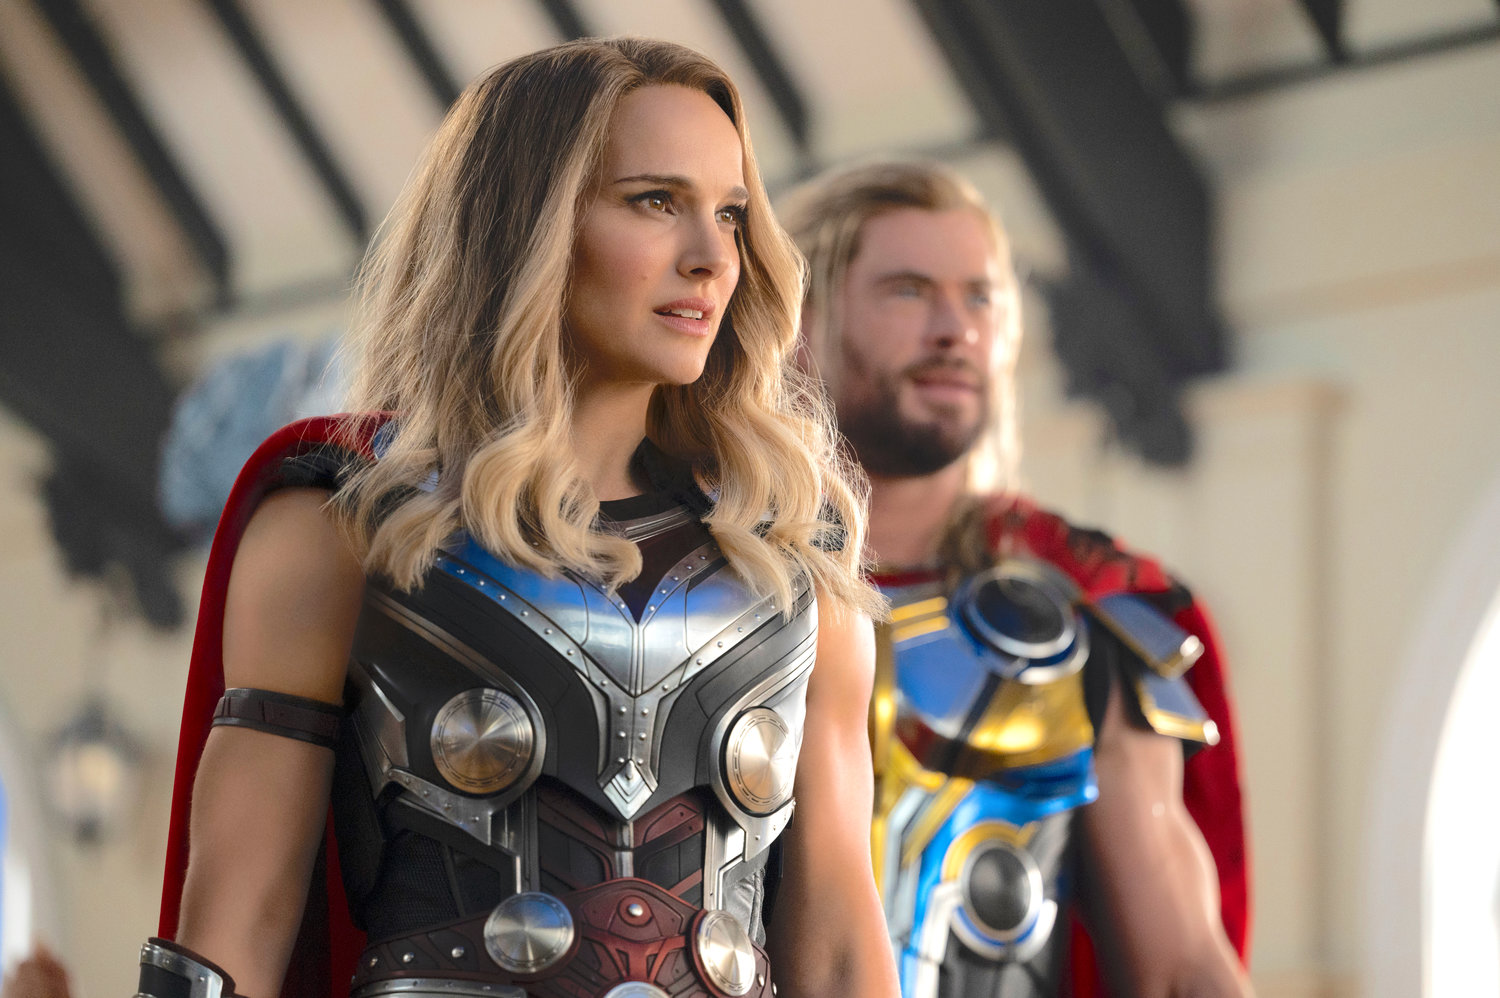 Natalie Portman, left, and Chris Hemsworth in a scene from “Thor: Love and Thunder.”